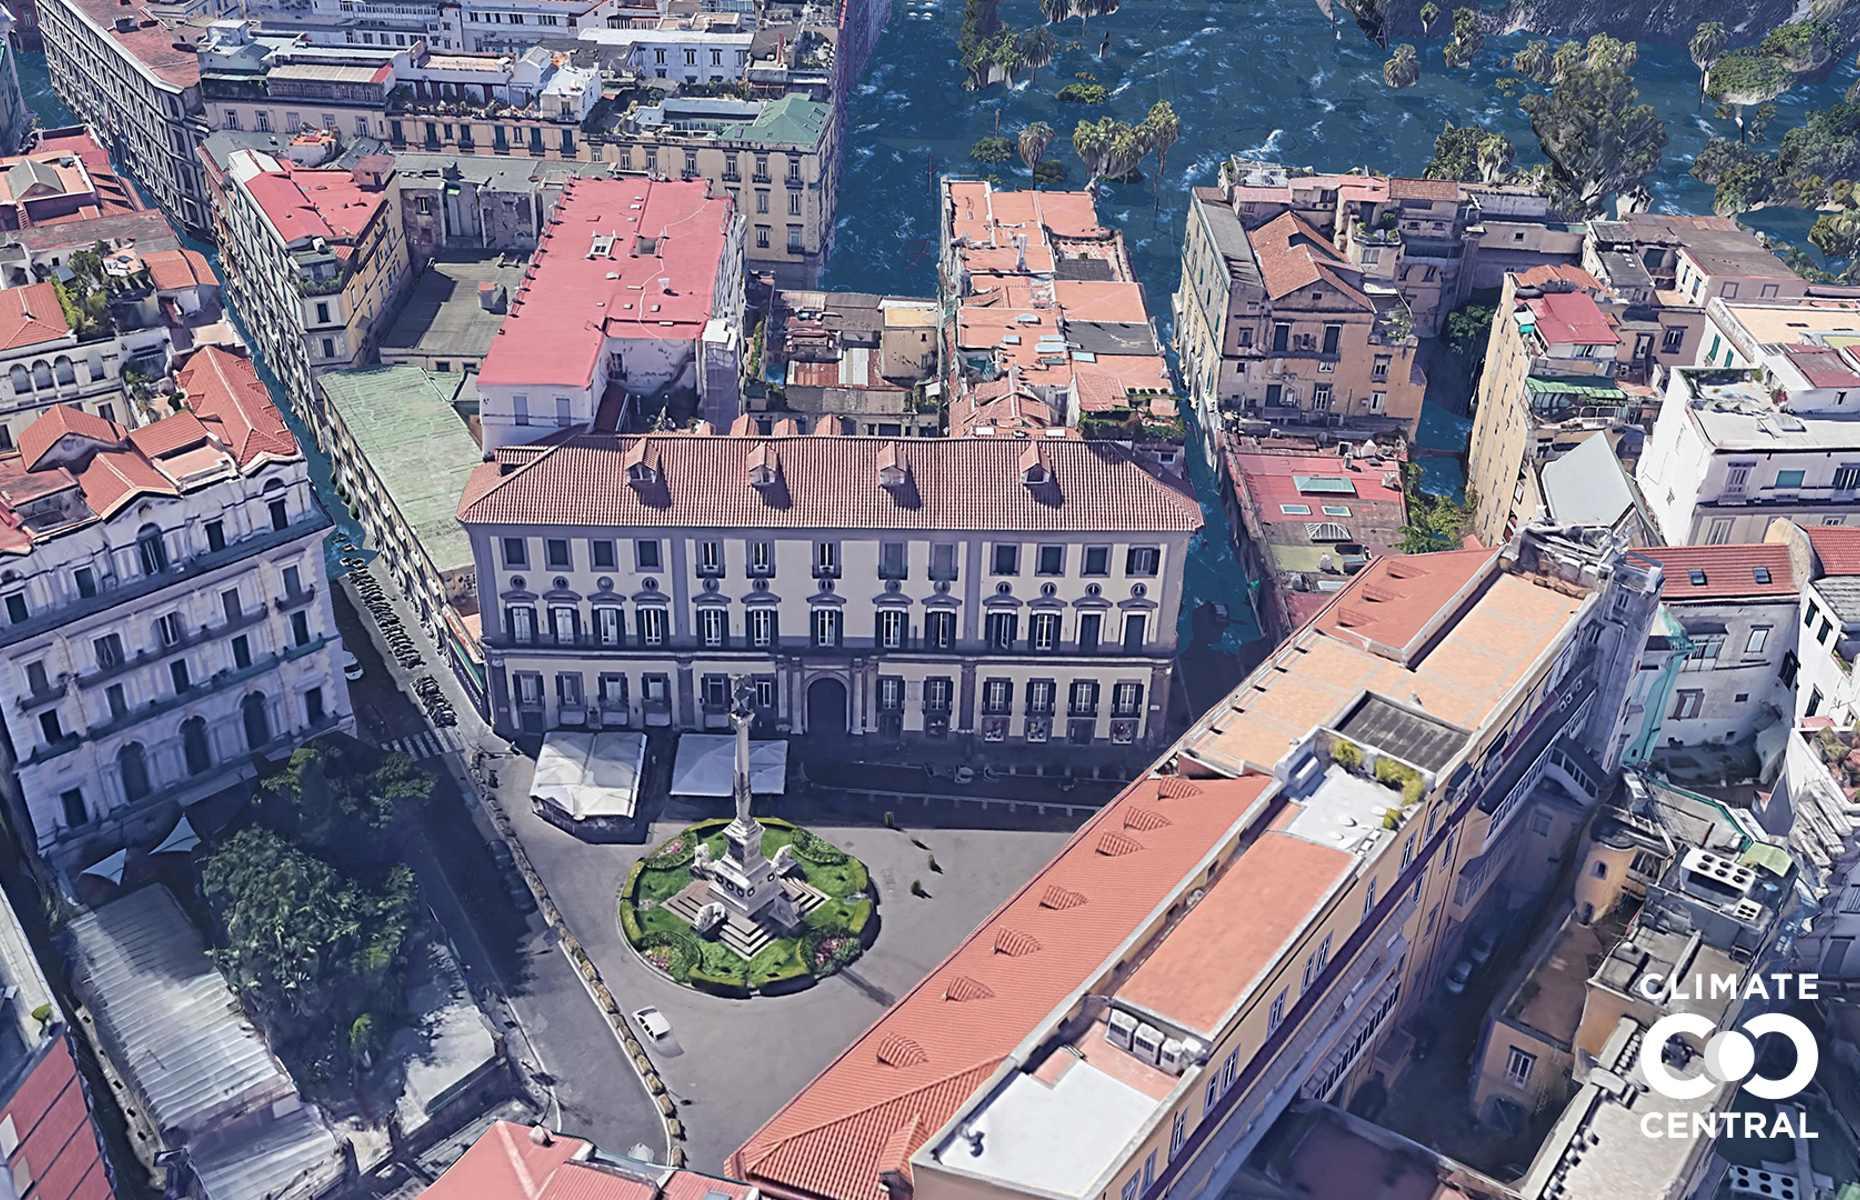 Also known as Martyr’s Square, the historic Piazza dei Martiri in Naples looks like it might just about remain unscathed even if warming hits 3°C (5.4°F), but nearby streets and coastal areas are set to be flooded.